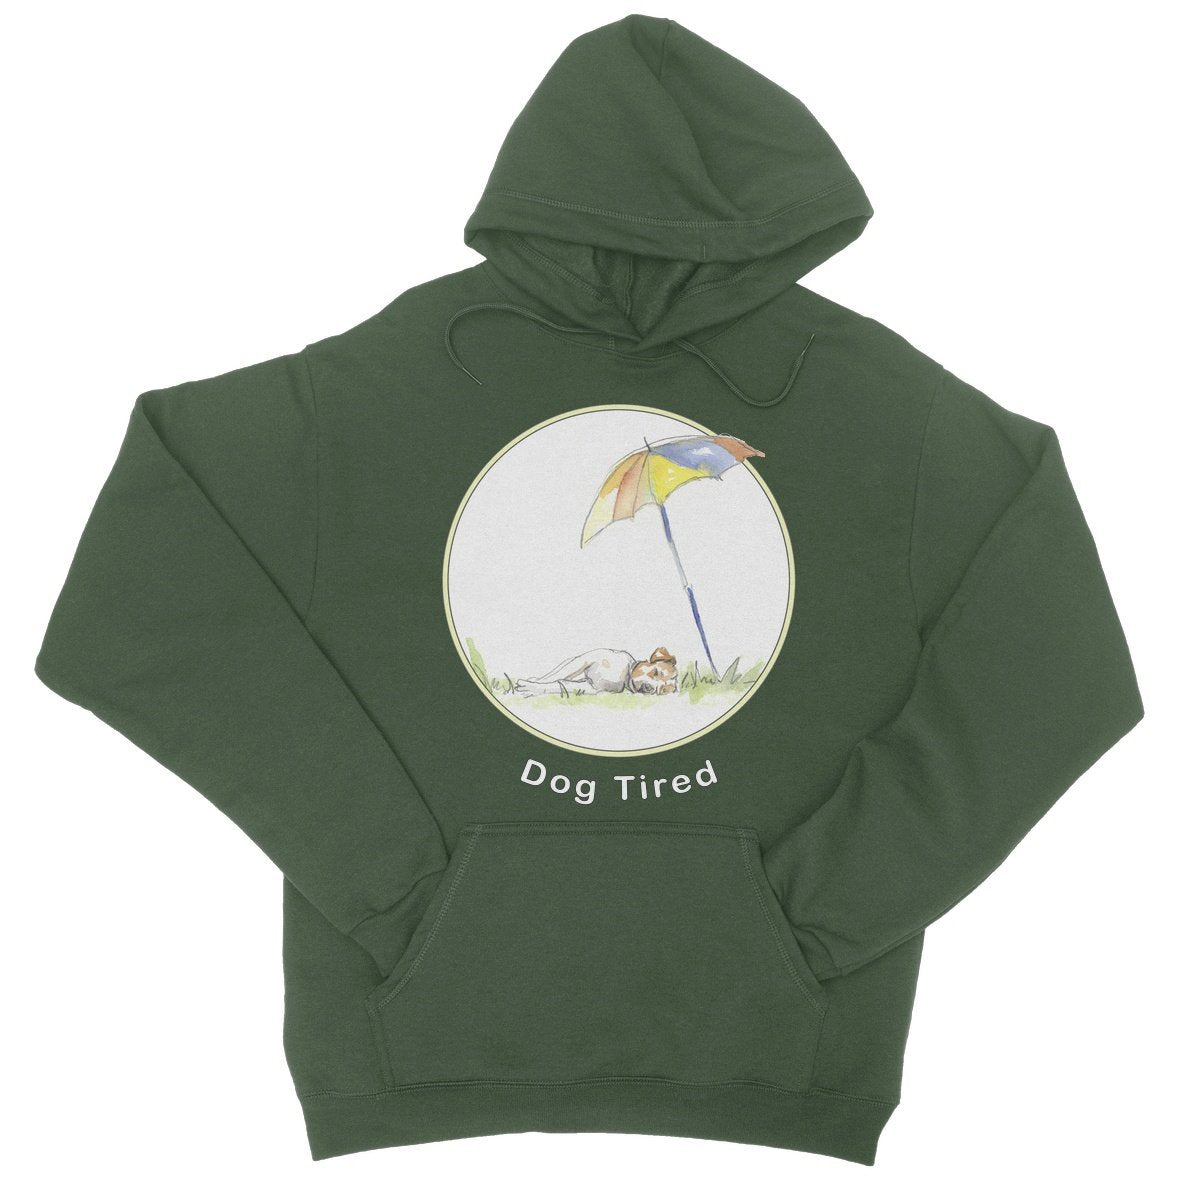 College Hoodie - 'Dog Tired'